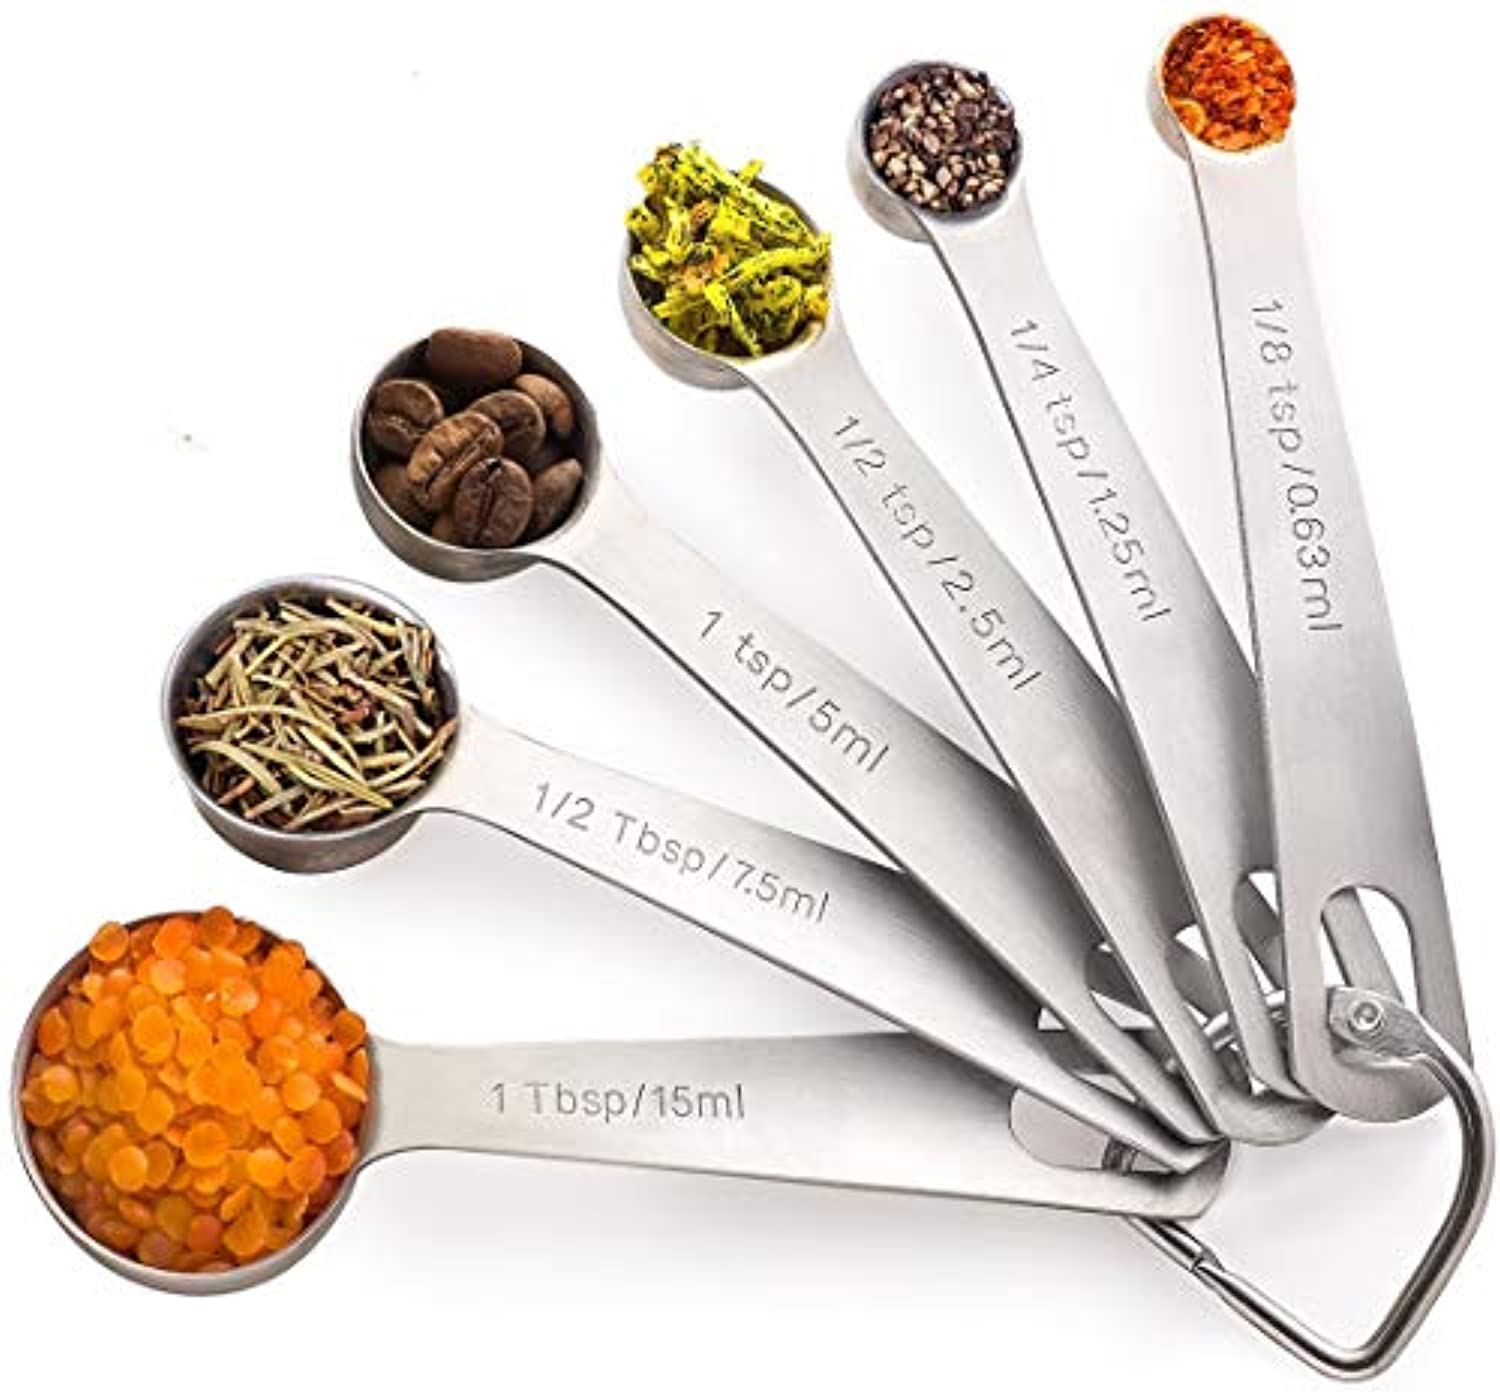 Stainless Steel Measuring Spoons Set Of 6 - Heavy Duty Stainless Steel